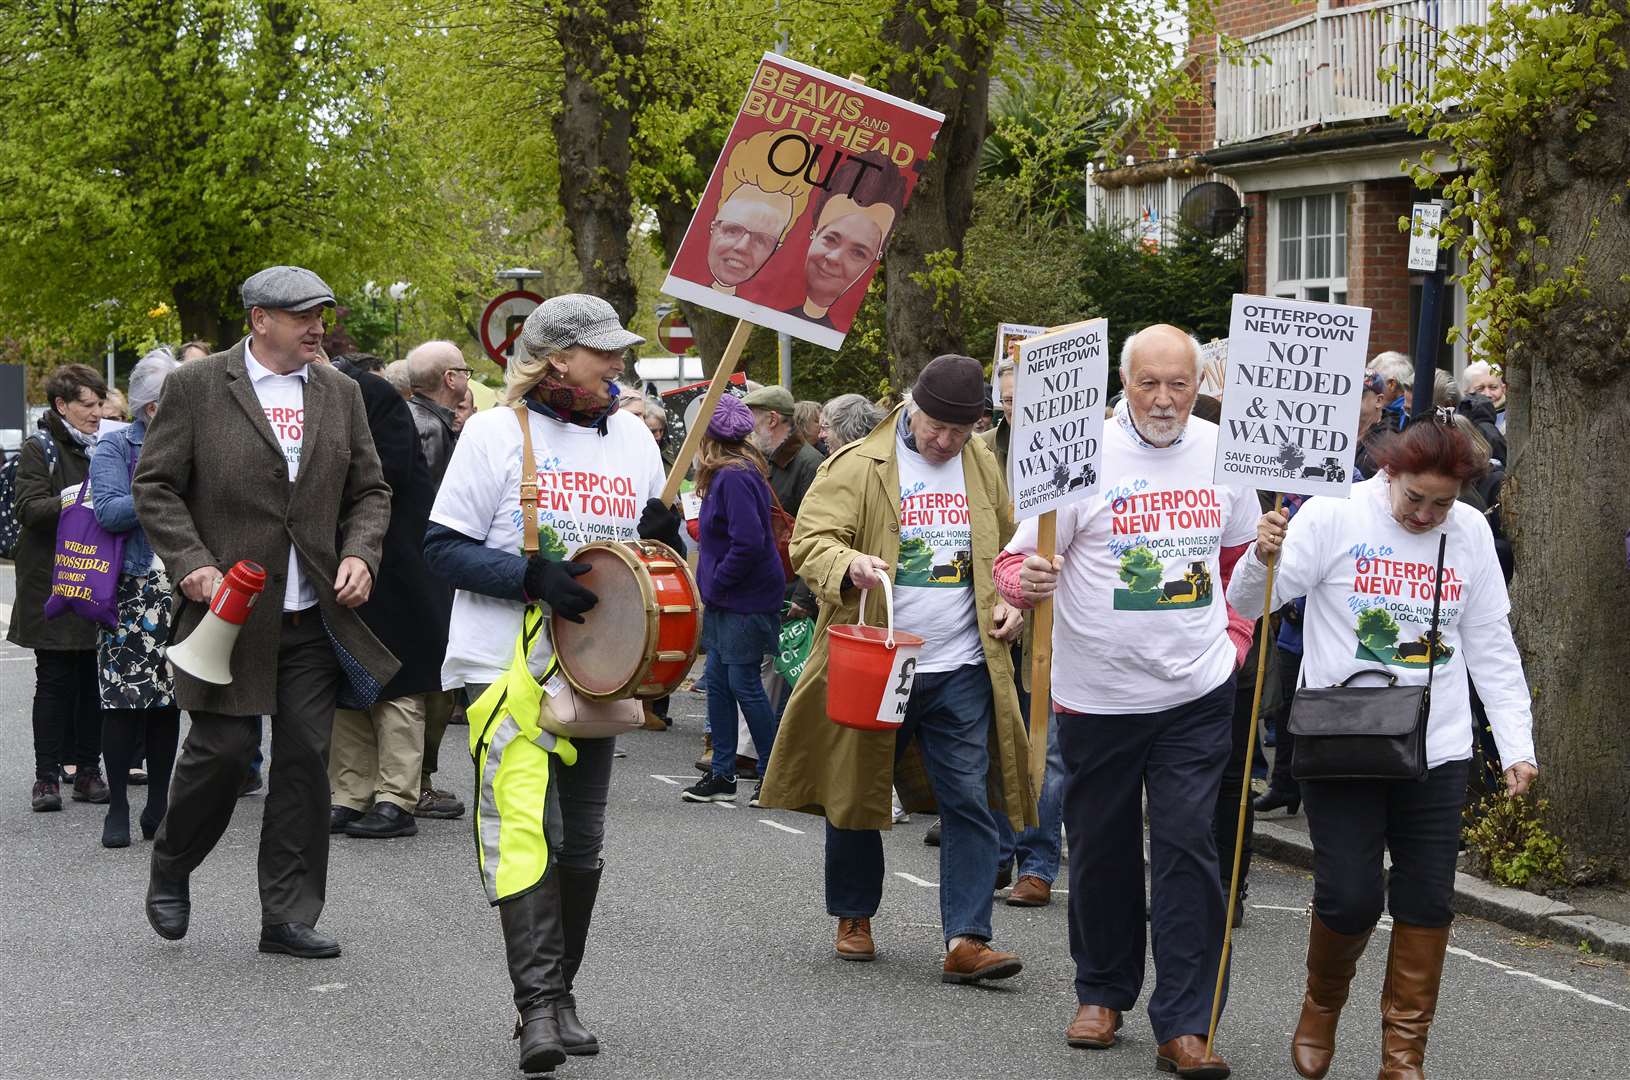 Opponents of the Otterpool Park scheme march in Hythe in 2019. Picture: Paul Amos